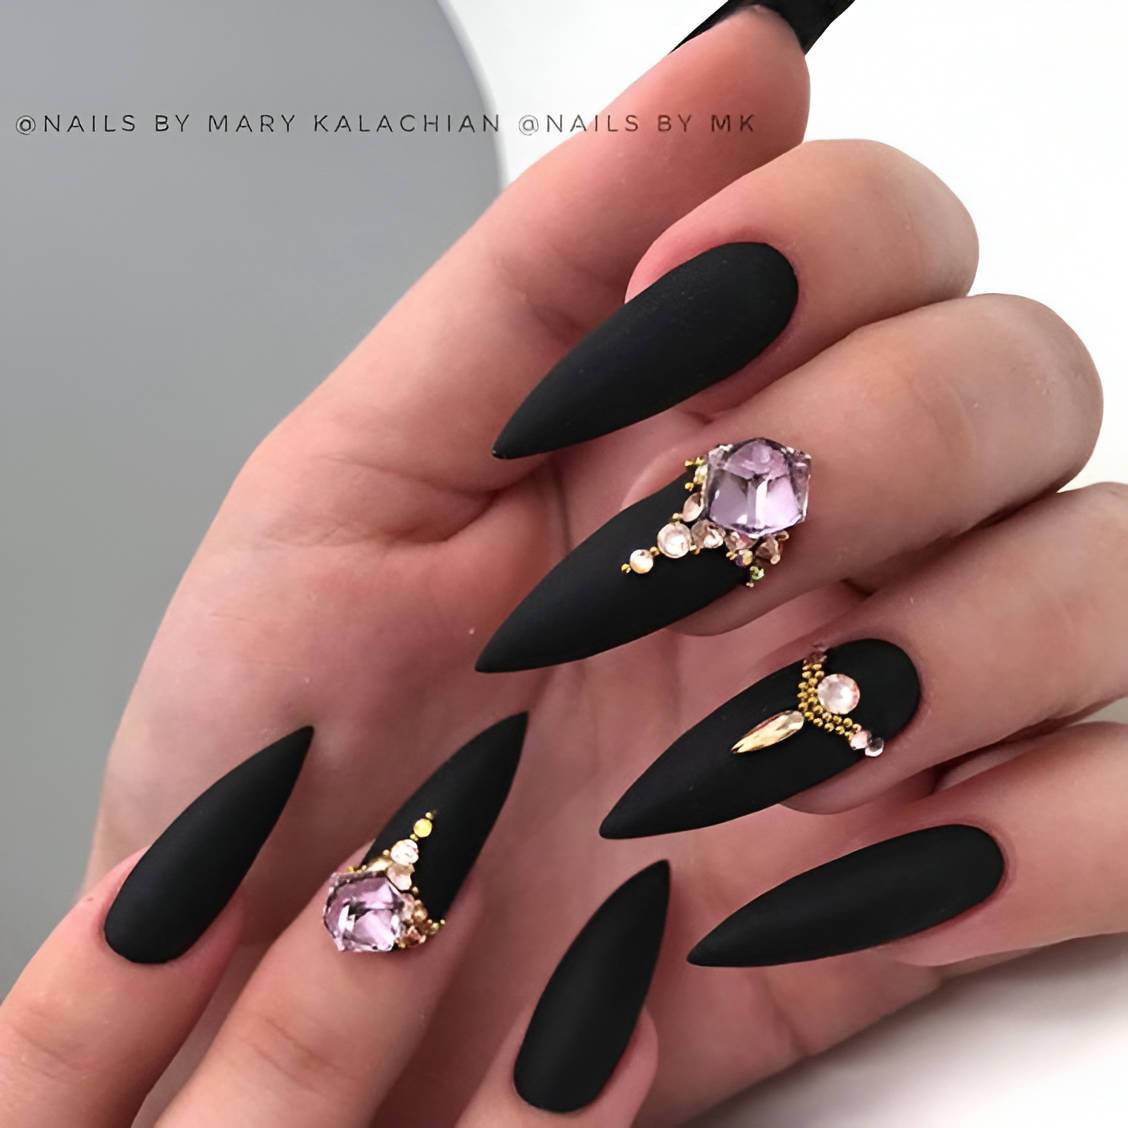 Stunning Stiletto Nail Designs Nobody Can Resist - 195